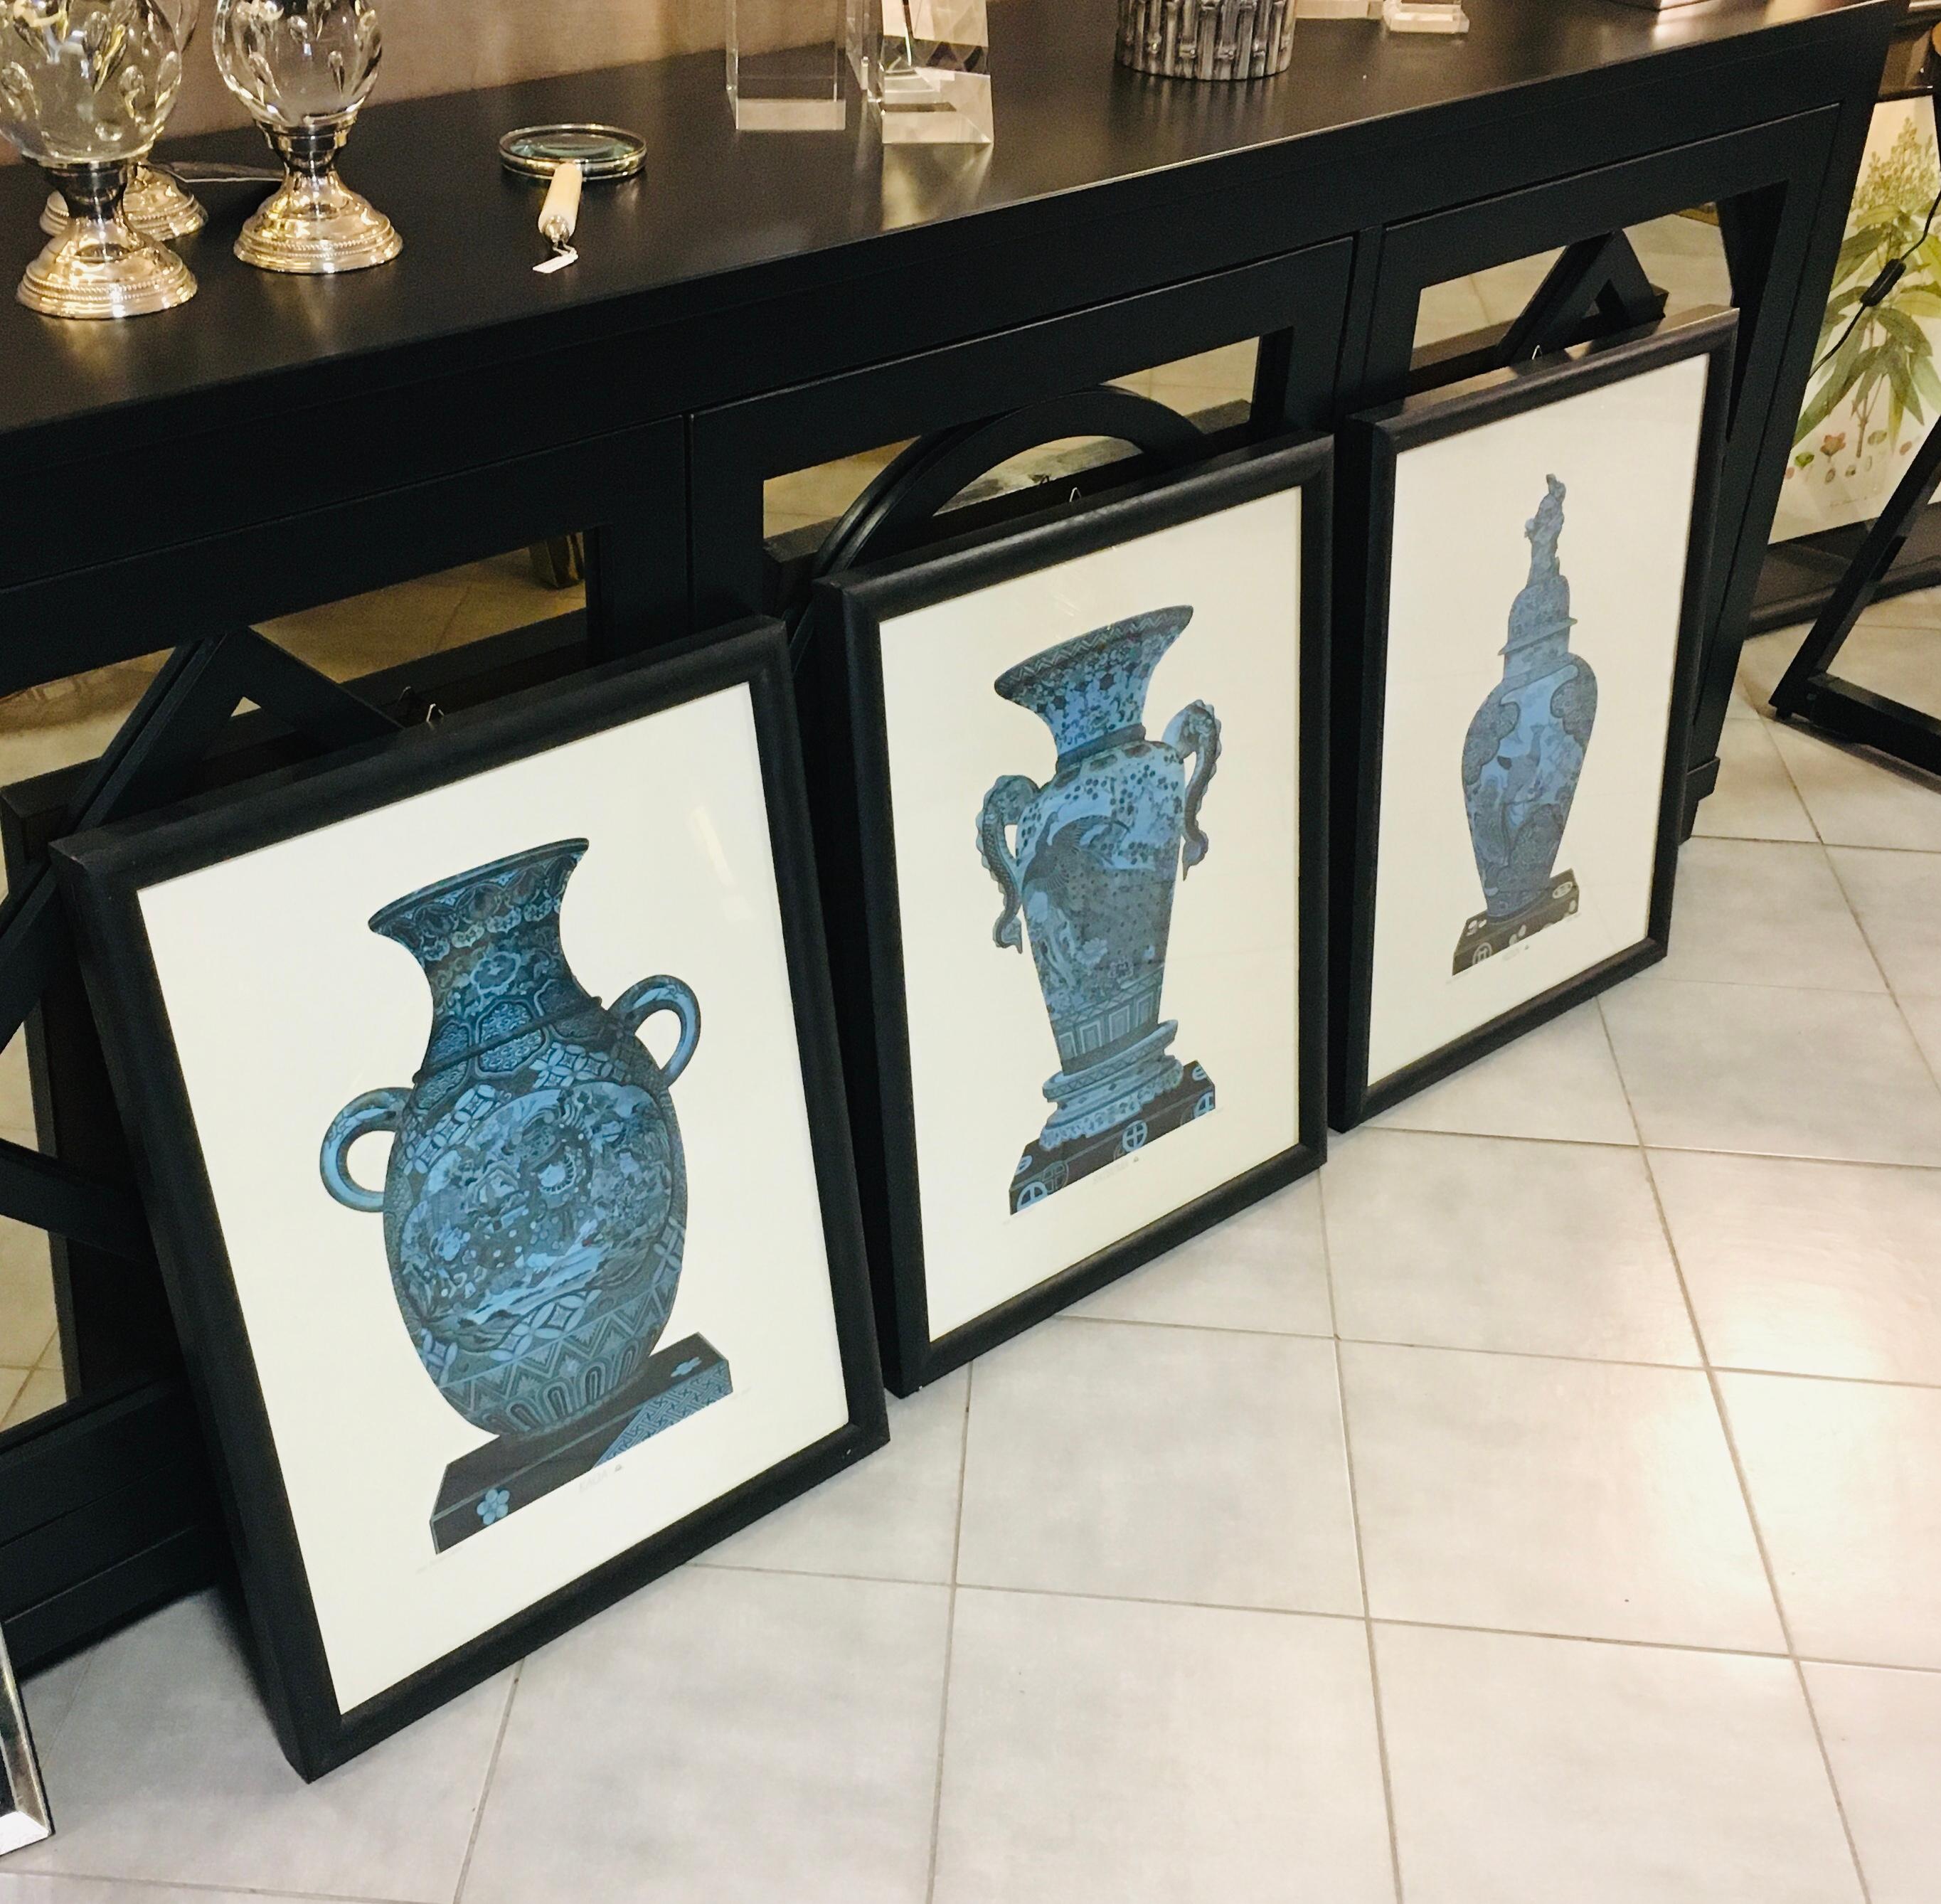 Series of three prints representing 3 different ancient Chinese vases with a black patinated wooden frame, it is printed with an antique press and colored by our best local artisans.
With an experience of over 40 years, Artecornici design create